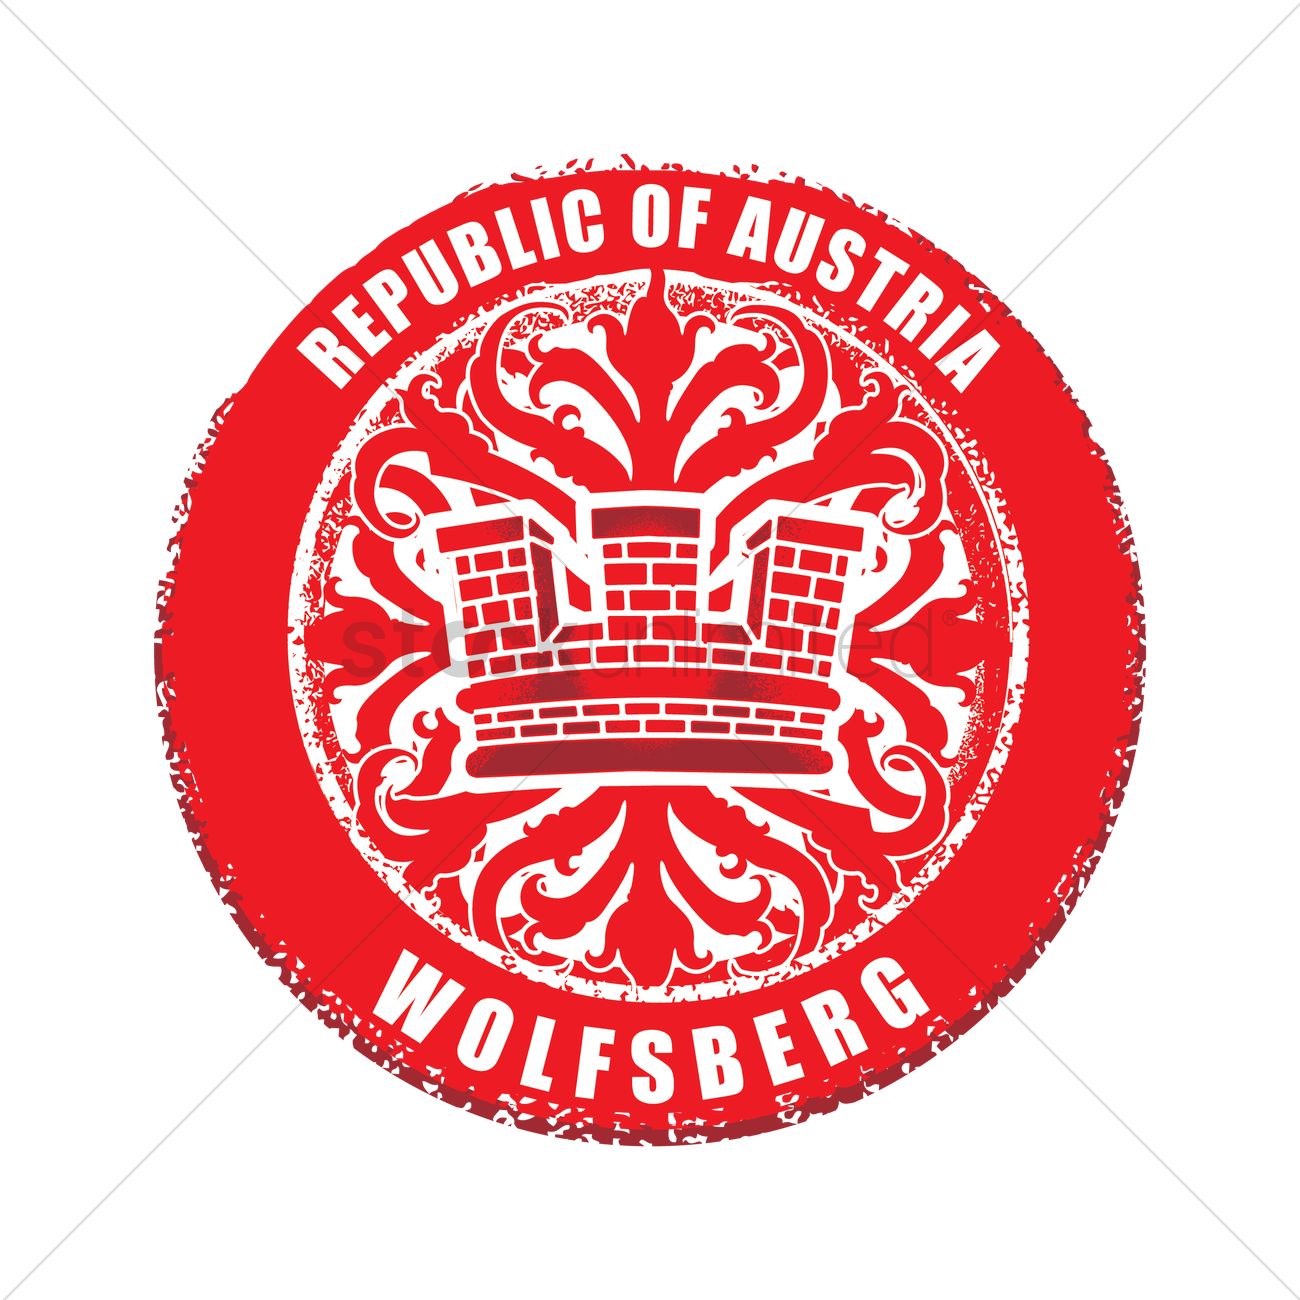 Wolfsberg rubber stamp Vector Image.